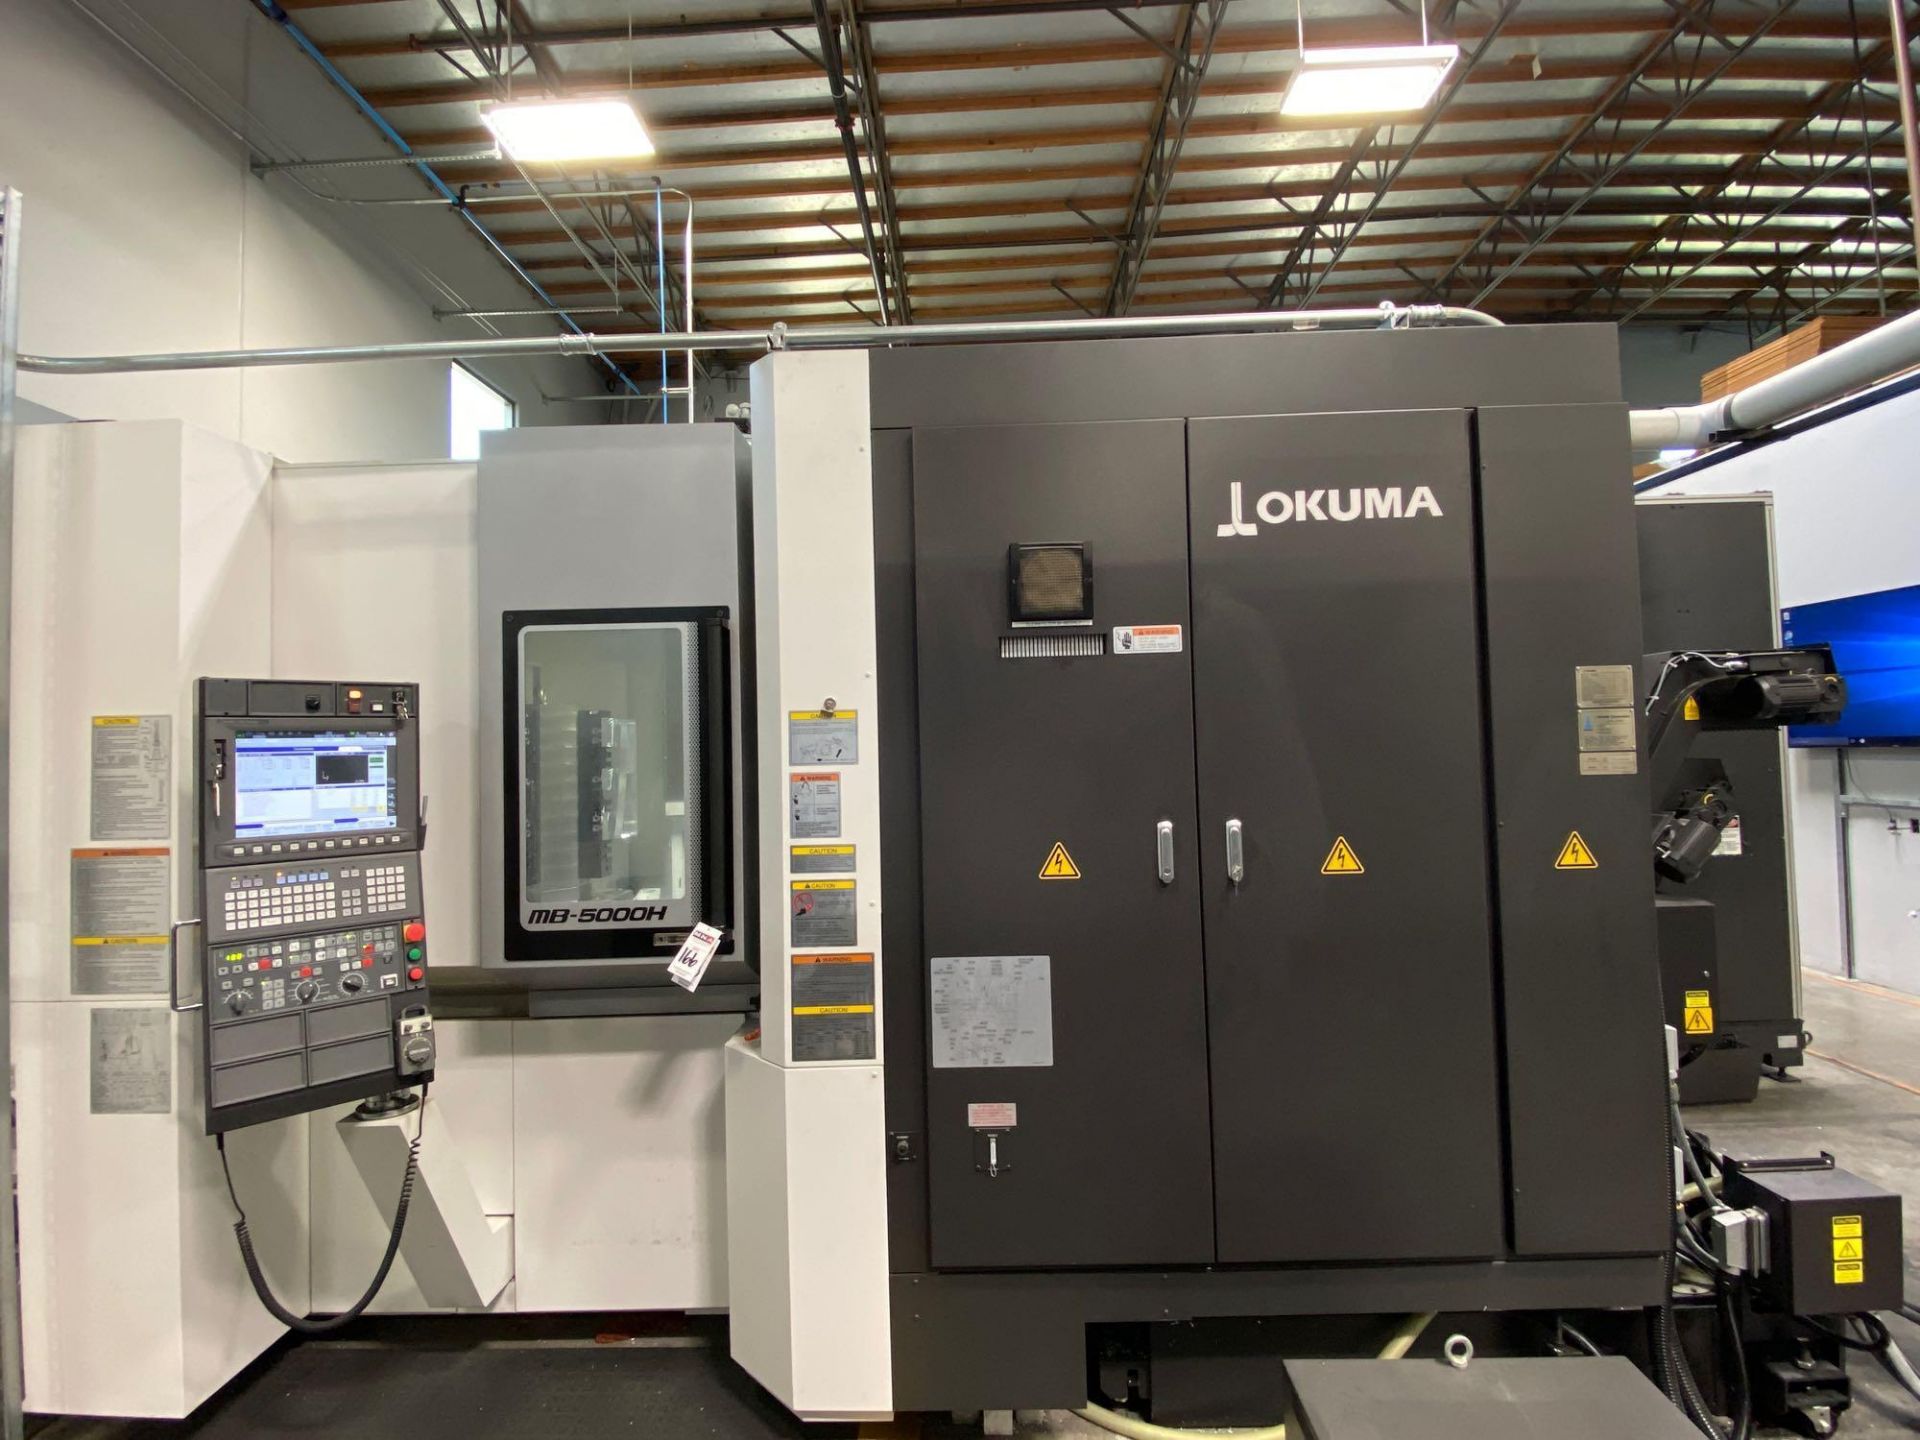 (2) Okuma MB-5000H 4-Axis HMC in F.M.S., OSP-P300MA Ctrl., 30” x 30” x 30” Travels, New 2018 - Image 7 of 32